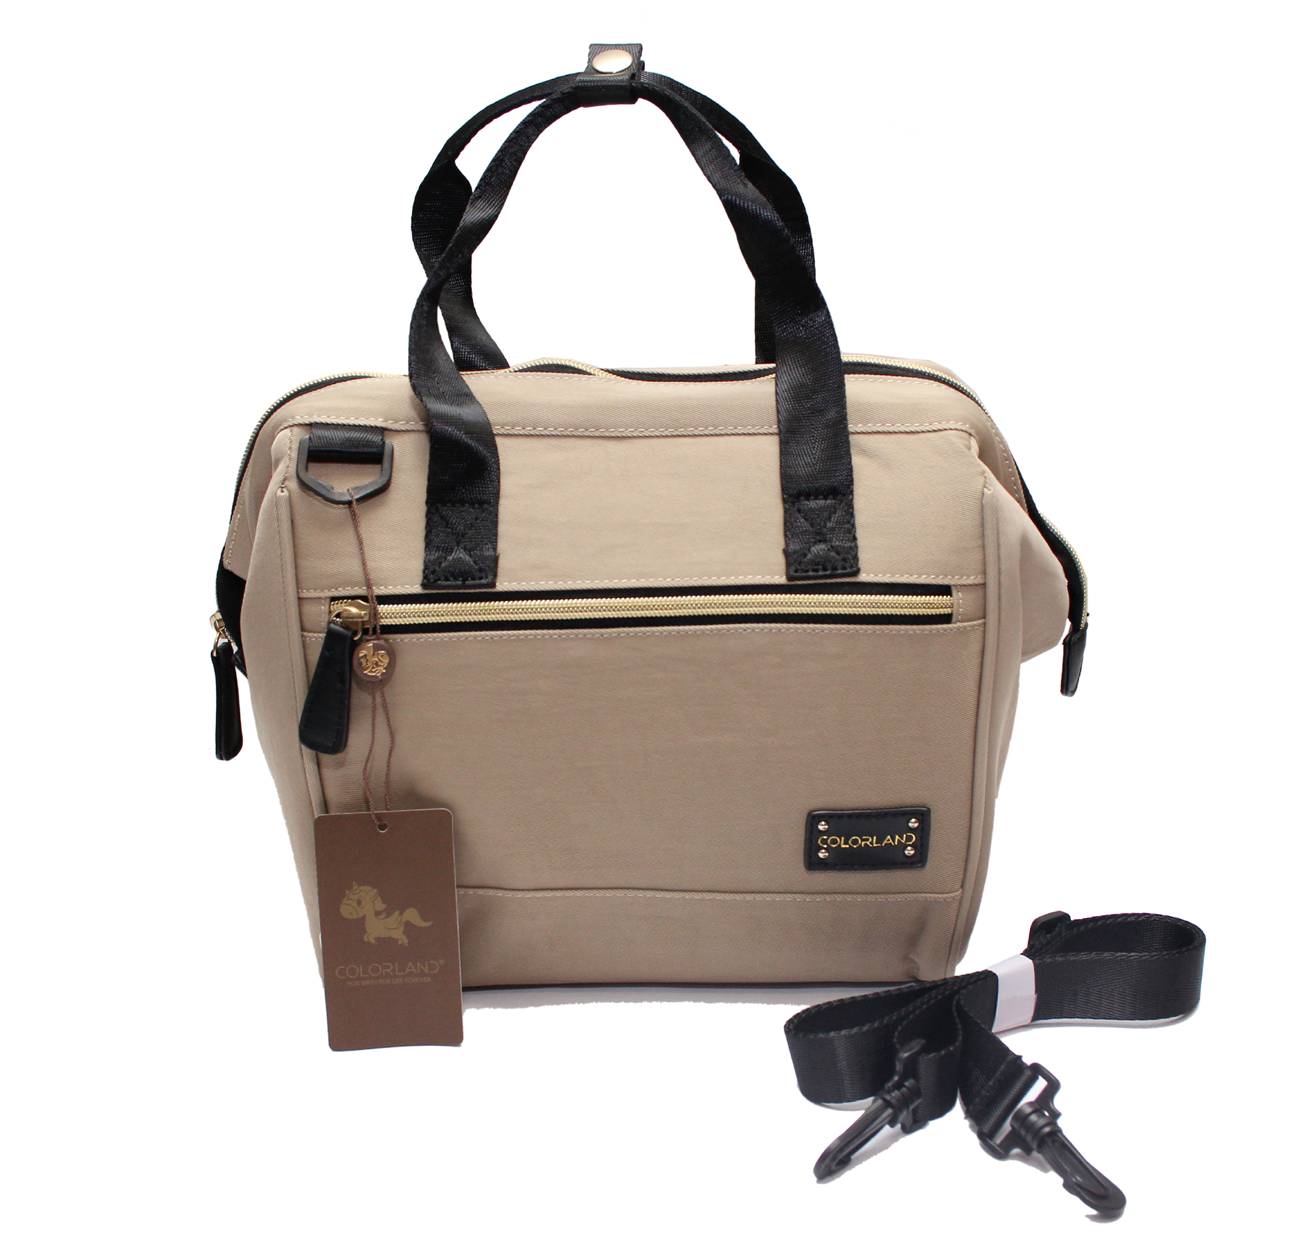 BABY MOTHER BAG - 30139